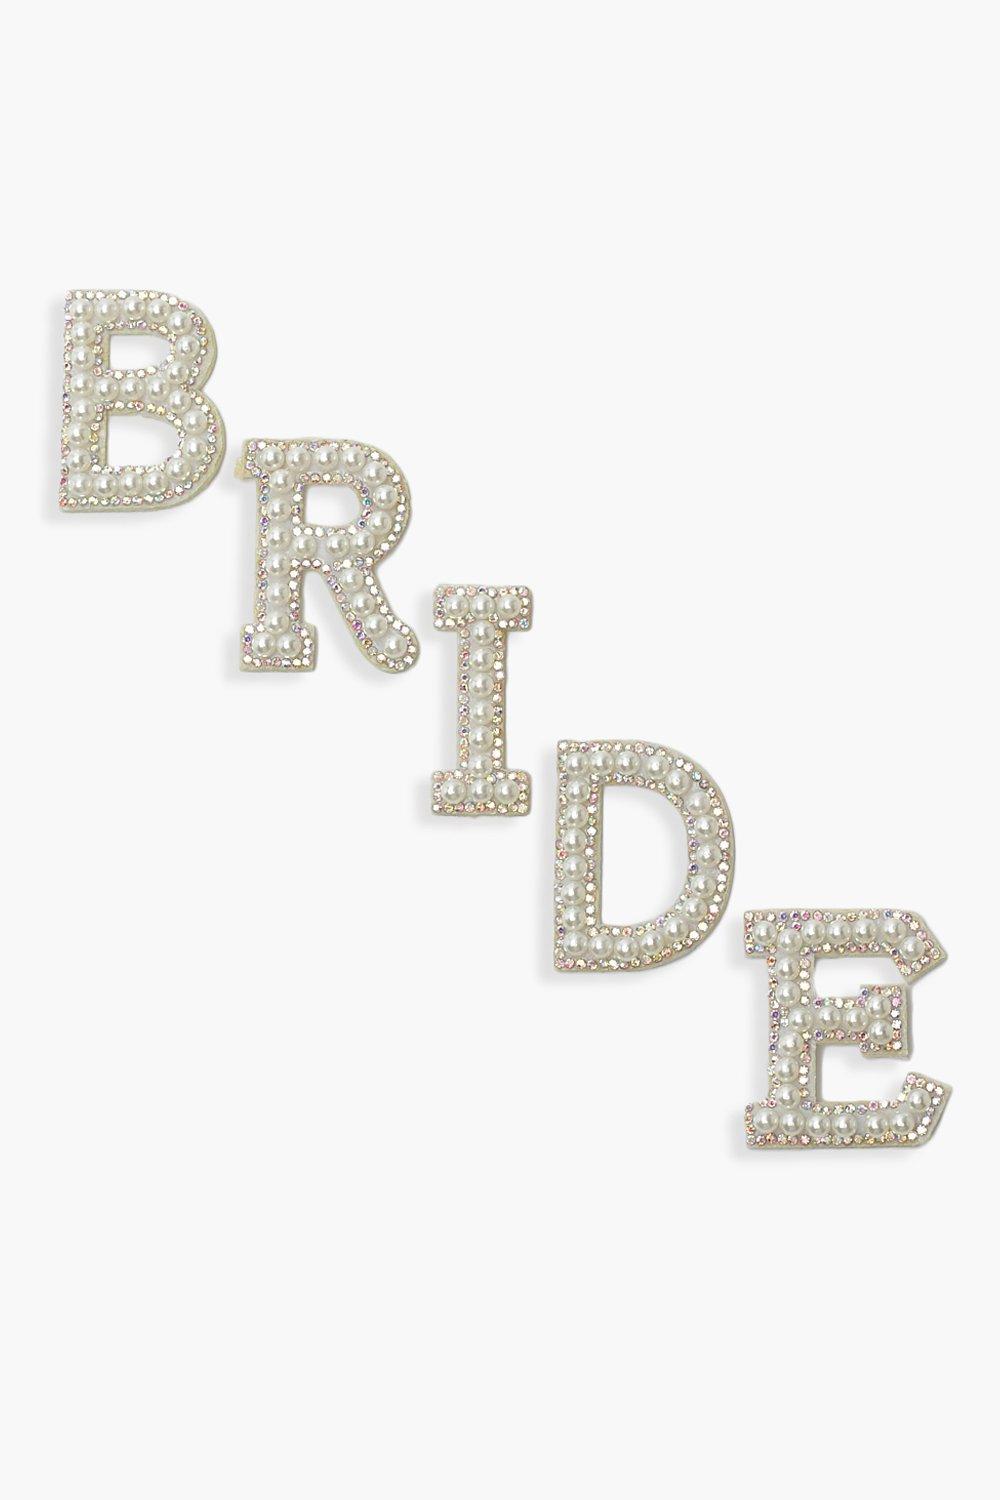 Image of Womens Bride Pearl Rhinestone Letters - White - One Size, White